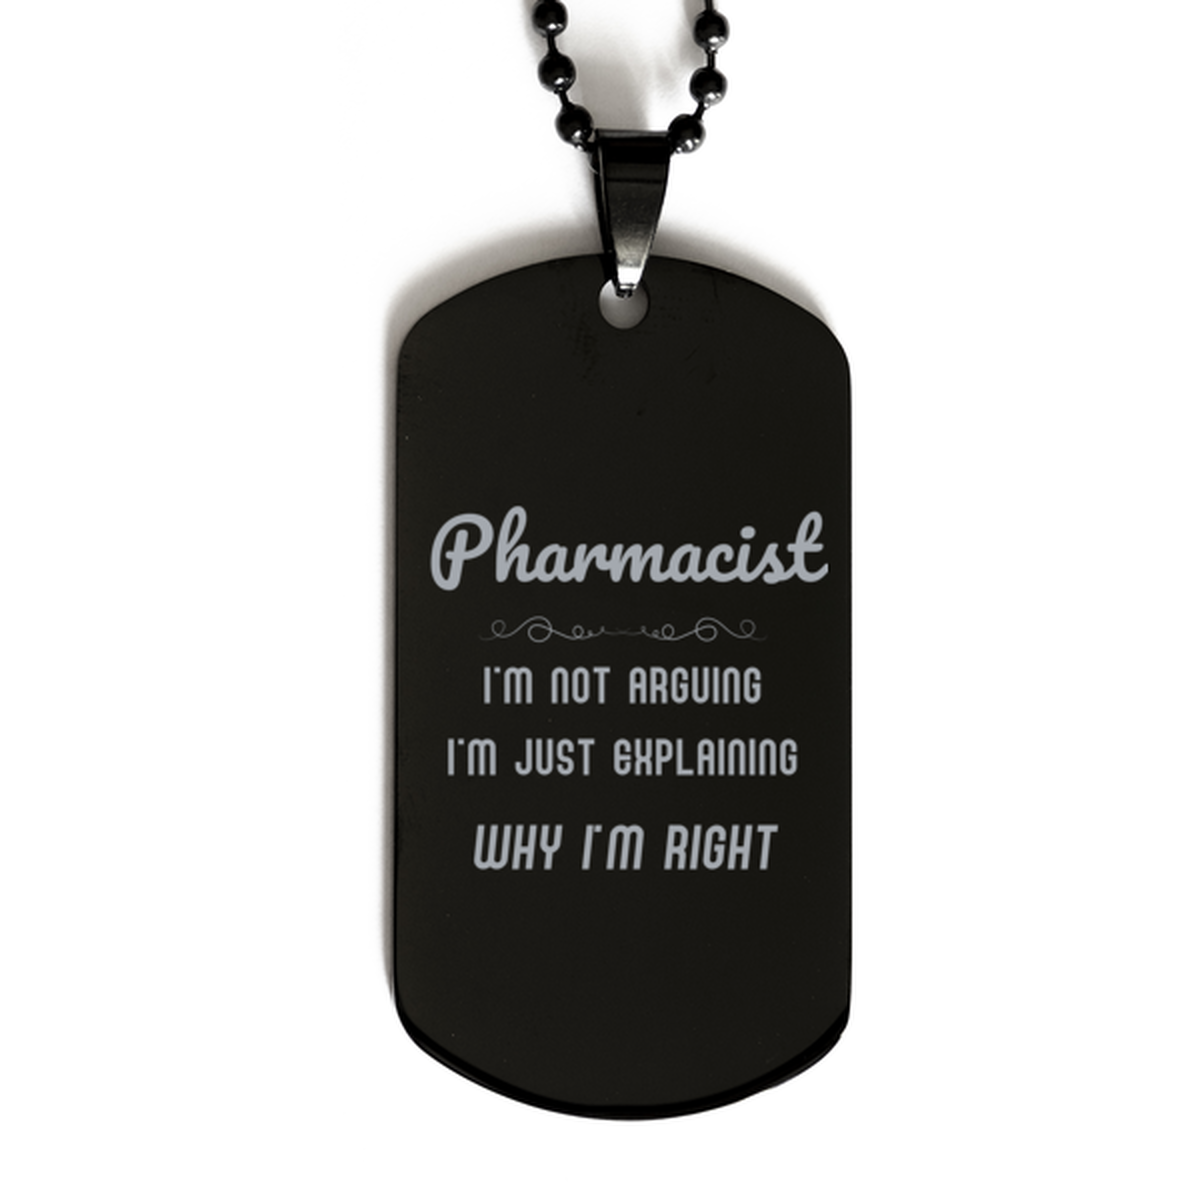 Pharmacist I'm not Arguing. I'm Just Explaining Why I'm RIGHT Black Dog Tag, Funny Saying Quote Pharmacist Gifts For Pharmacist Graduation Birthday Christmas Gifts for Men Women Coworker